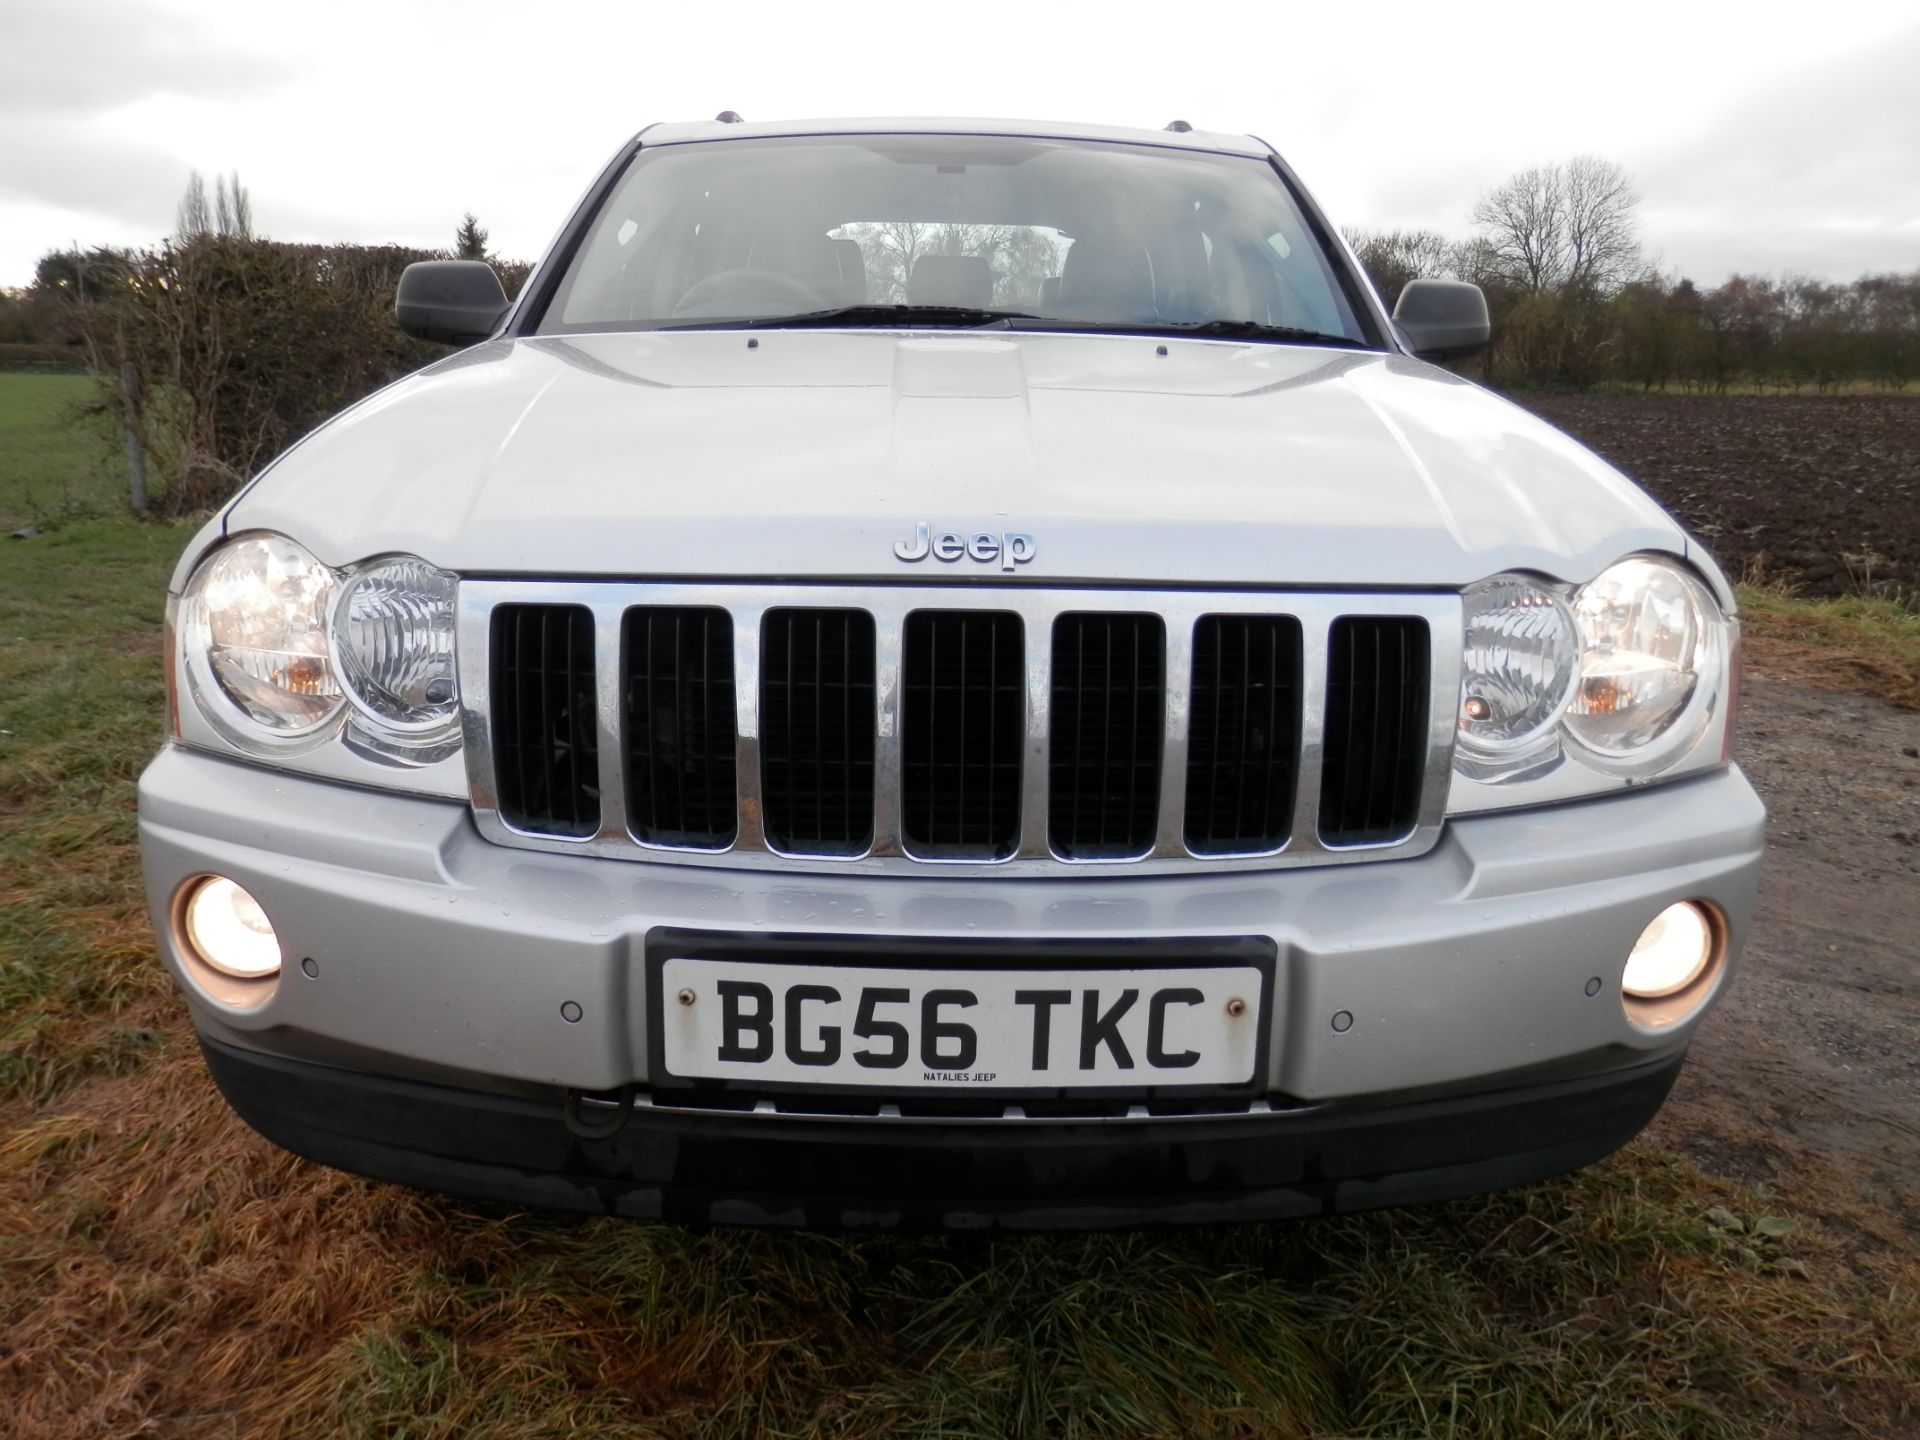 2006/56 PLATE JEEP GRAND CHEROKEE 3.0 CRD V6 TURBO DIESEL AUTO. ONLY 92K MILES. 12 MONTHS MOT - Image 7 of 28